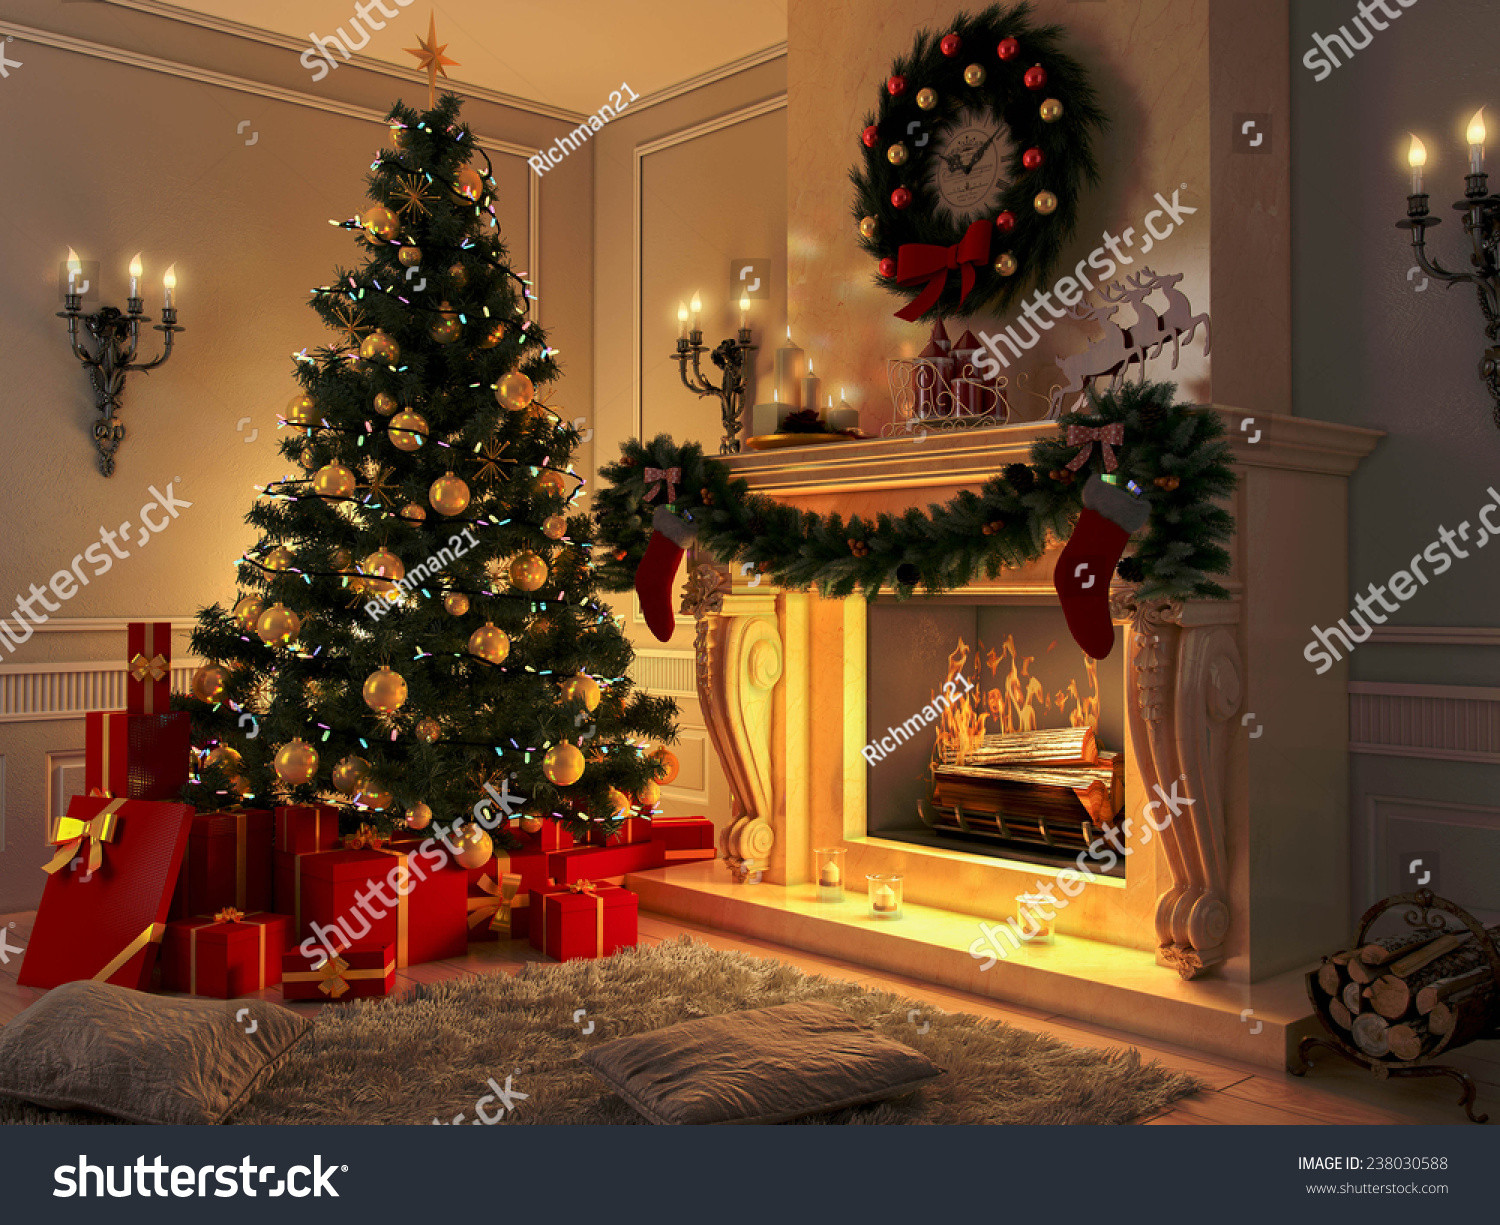 Christmas Tree Next To Fireplace
 3d Rendering New Year Interior With Christmas Tree